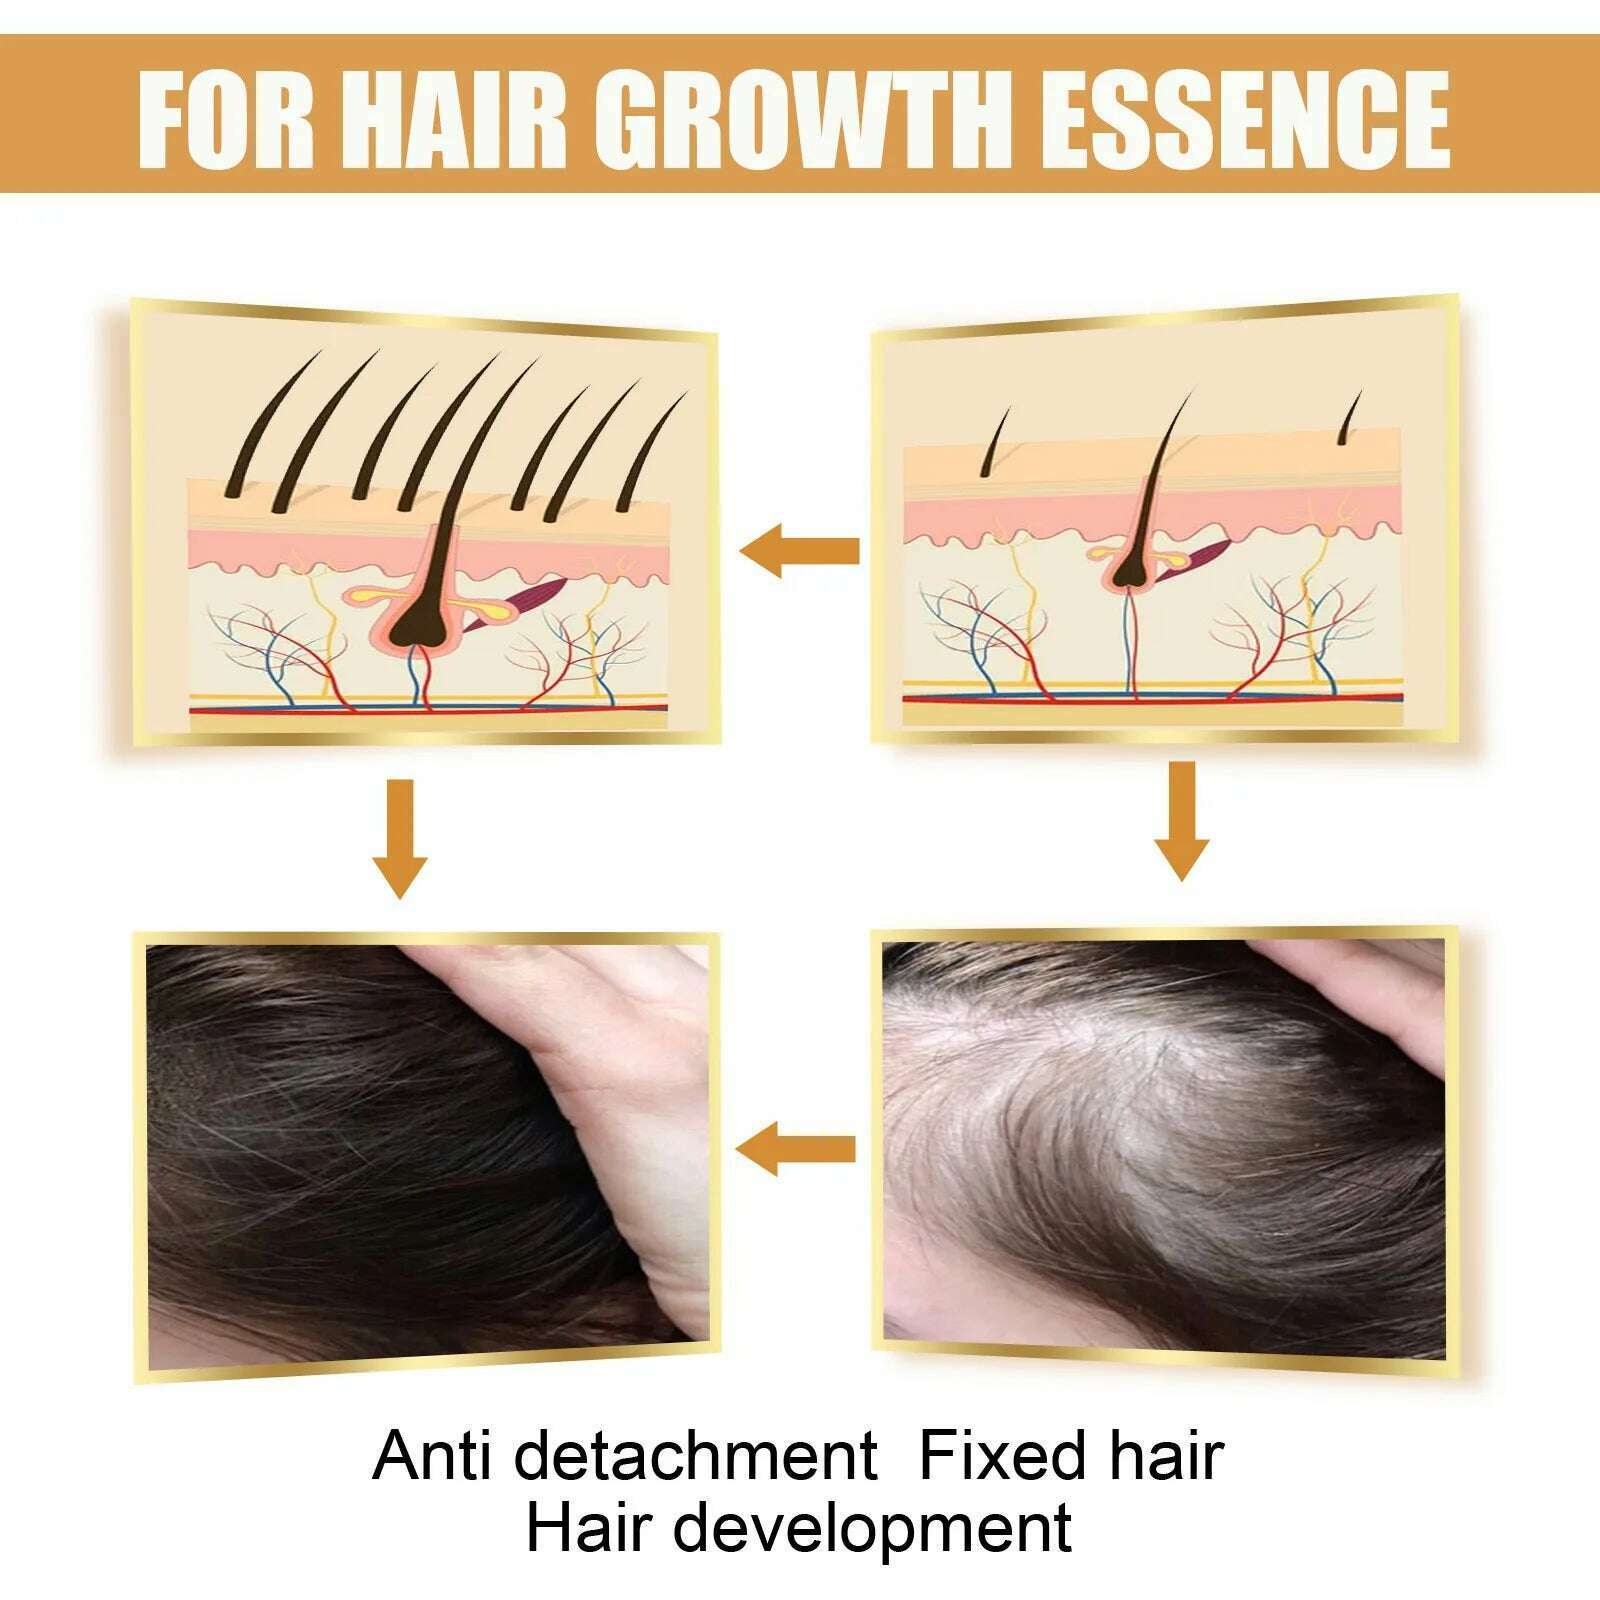 KIMLUD, 30ml Fermented Rice Water Serum Anti Hair Loss Stronger Healthier Hair Growing Essence Thicker Thinning Hair Growth Product, KIMLUD Womens Clothes